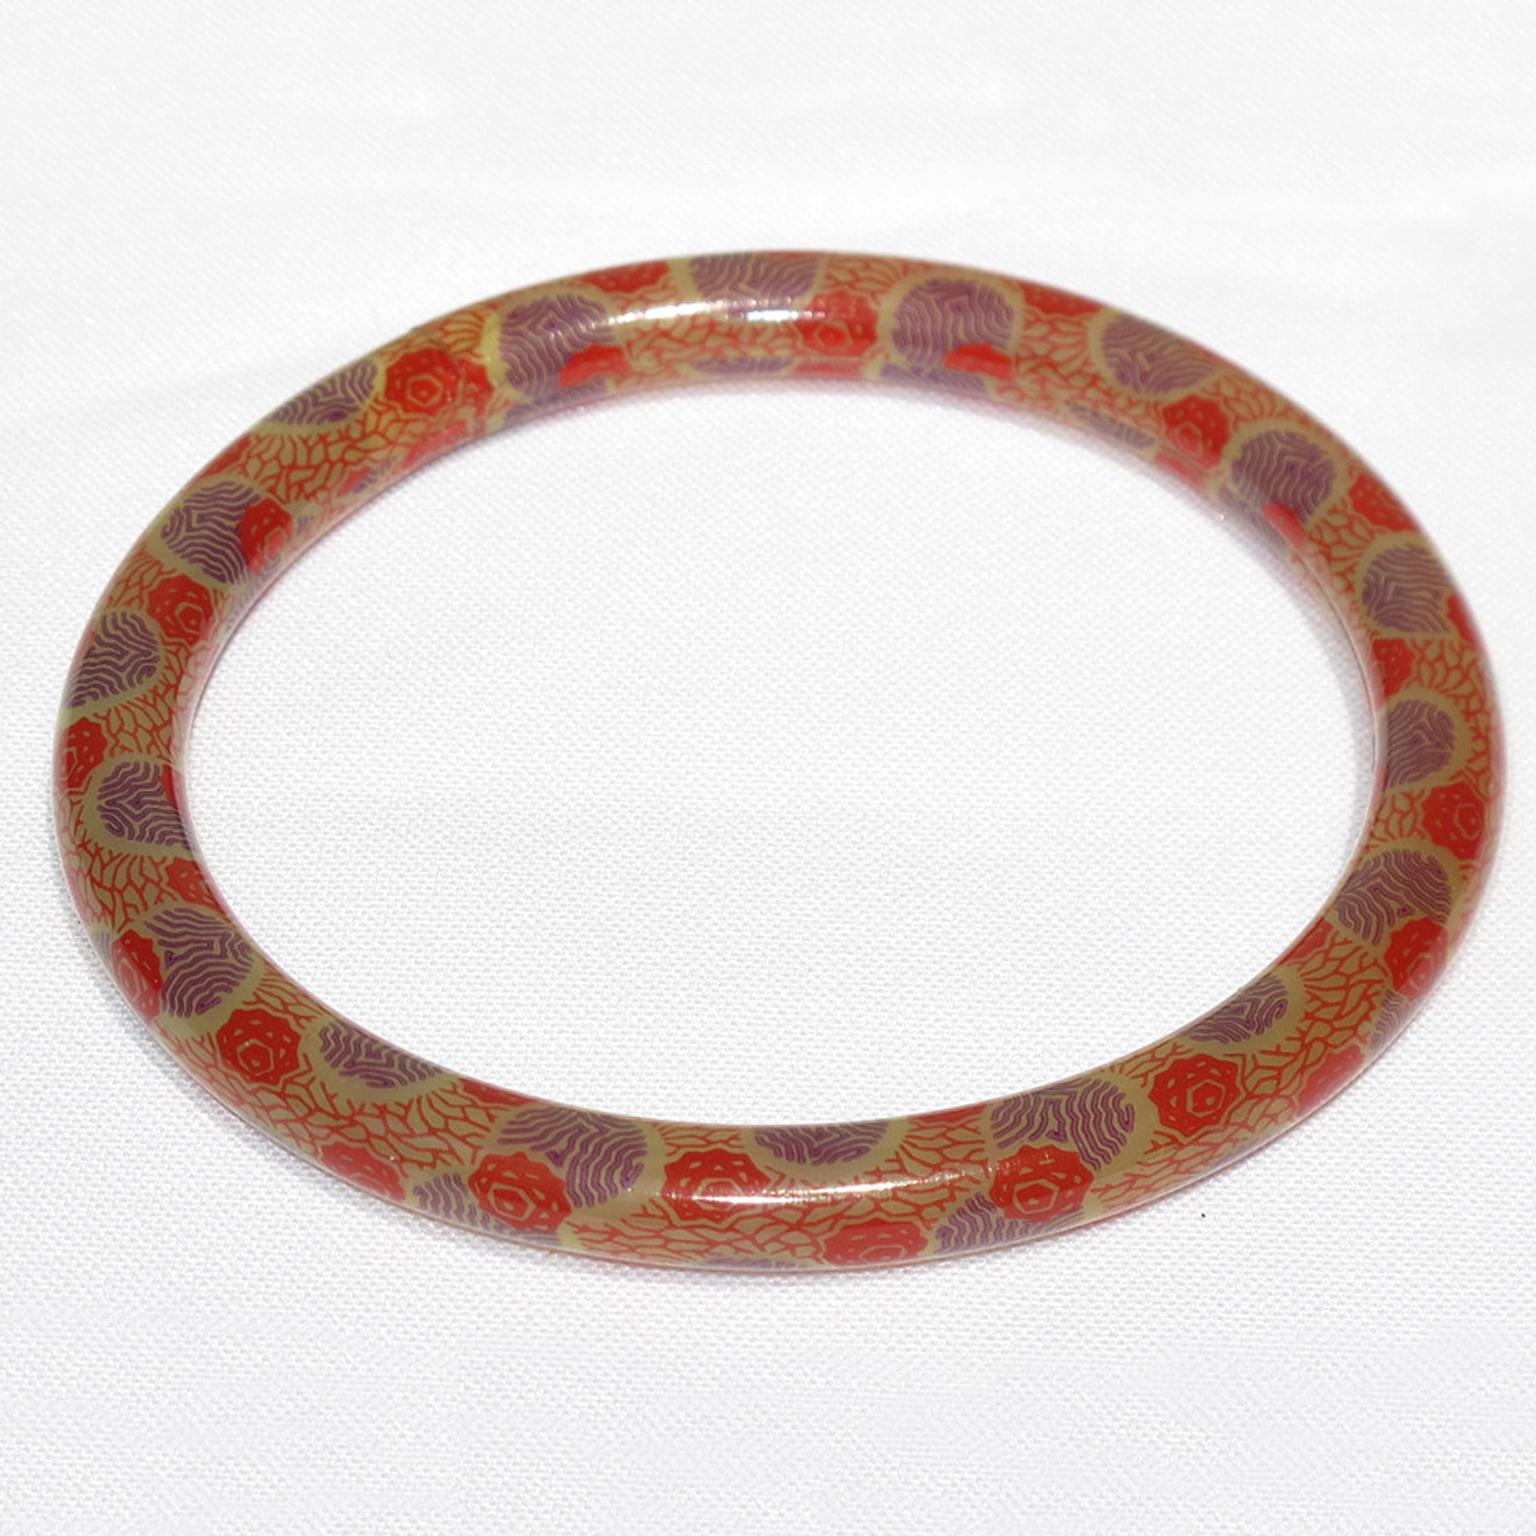 A stunning 1920s French Art Deco celluloid bracelet bangle. It features a light hollow tube shape with a floral geometric design around the bracelet. 
The hollow bracelet technique is an ancient technique applied to jewelry at the turn of the 20th